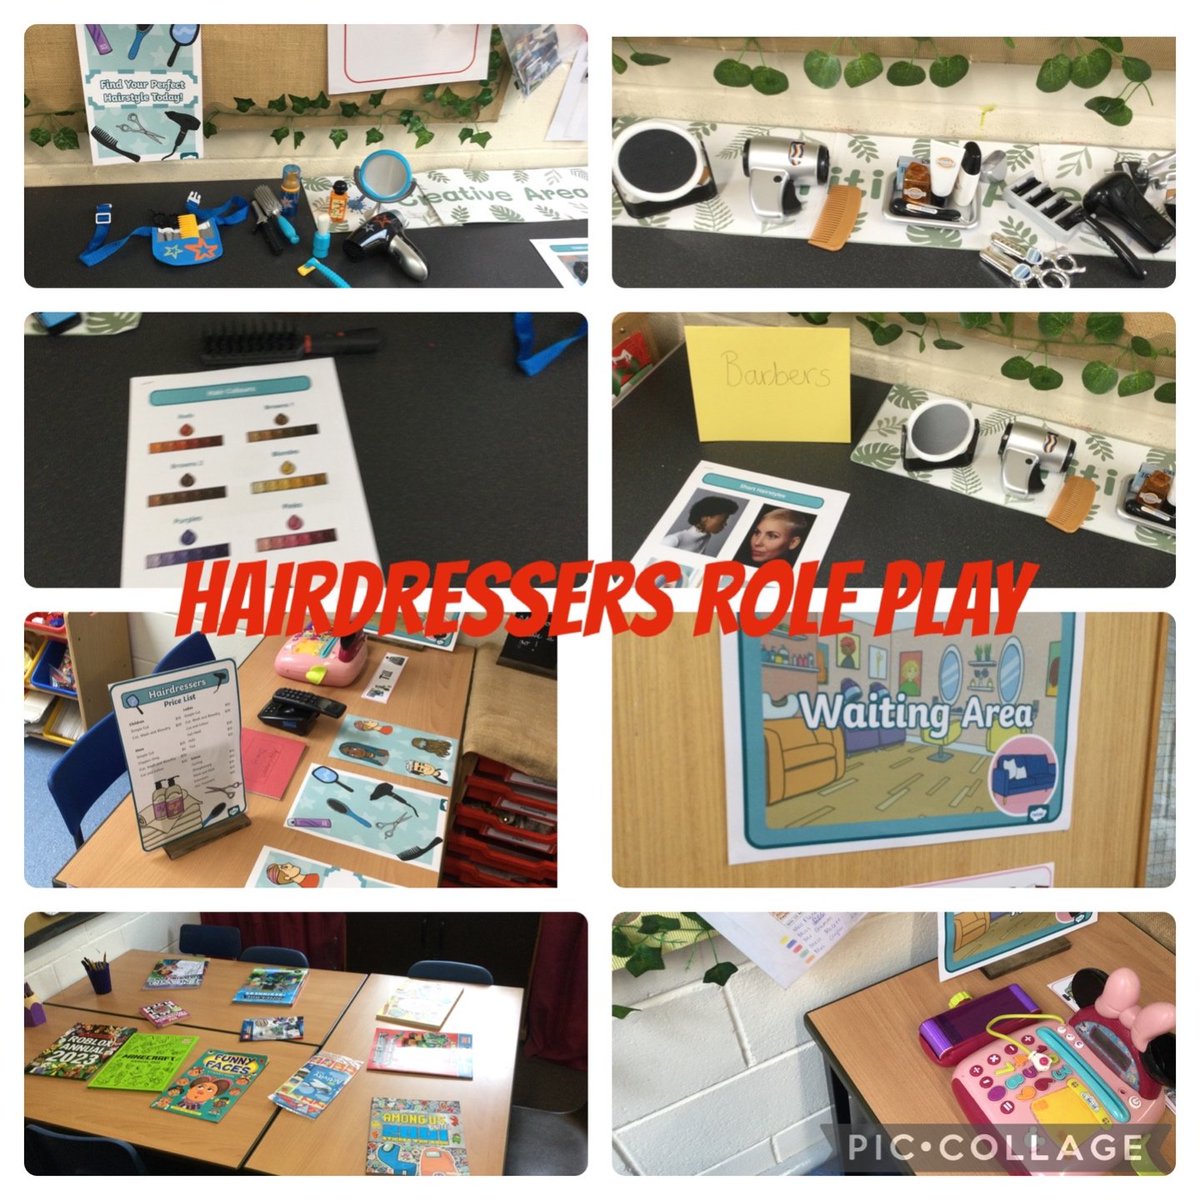 Career week! 
In our class this afternoon we focused on the job of a hairdresser, and enjoyed taking on several of the responsibilities through role play. 
#careersweek 
#enterprisingandcreative 
#aspirations